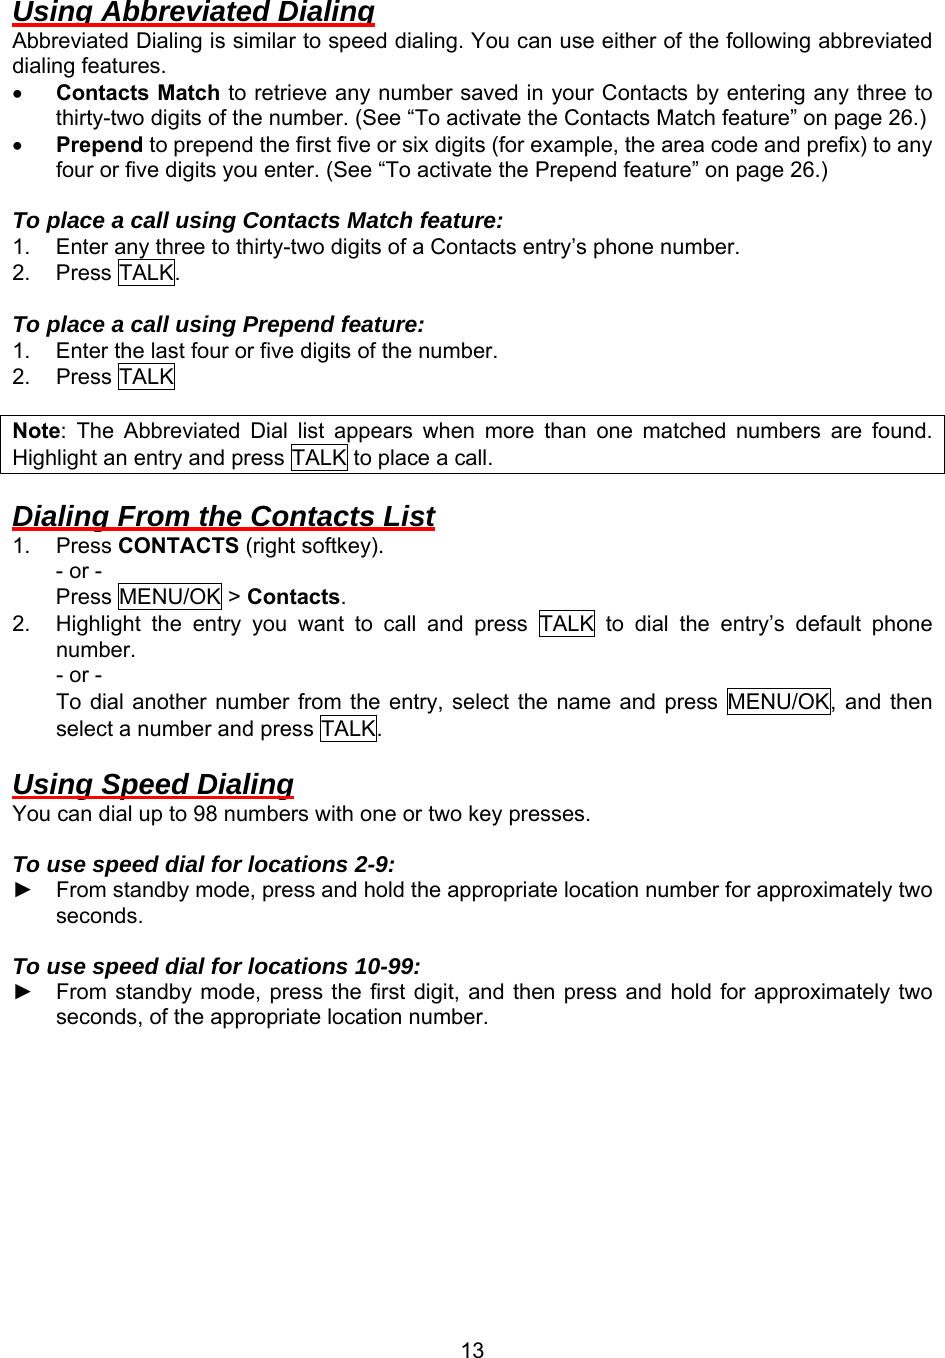  13Using Abbreviated Dialing Abbreviated Dialing is similar to speed dialing. You can use either of the following abbreviated dialing features. •  Contacts Match to retrieve any number saved in your Contacts by entering any three to thirty-two digits of the number. (See “To activate the Contacts Match feature” on page 26.) •  Prepend to prepend the first five or six digits (for example, the area code and prefix) to any four or five digits you enter. (See “To activate the Prepend feature” on page 26.)  To place a call using Contacts Match feature: 1.  Enter any three to thirty-two digits of a Contacts entry’s phone number. 2. Press TALK.  To place a call using Prepend feature: 1.  Enter the last four or five digits of the number. 2. Press TALK  Note: The Abbreviated Dial list appears when more than one matched numbers are found. Highlight an entry and press TALK to place a call.  Dialing From the Contacts List 1. Press CONTACTS (right softkey). - or - Press MENU/OK &gt; Contacts. 2.  Highlight the entry you want to call and press TALK to dial the entry’s default phone number. - or - To dial another number from the entry, select the name and press MENU/OK, and then select a number and press TALK.  Using Speed Dialing You can dial up to 98 numbers with one or two key presses.  To use speed dial for locations 2-9: ► From standby mode, press and hold the appropriate location number for approximately two seconds.  To use speed dial for locations 10-99: ► From standby mode, press the first digit, and then press and hold for approximately two seconds, of the appropriate location number.  